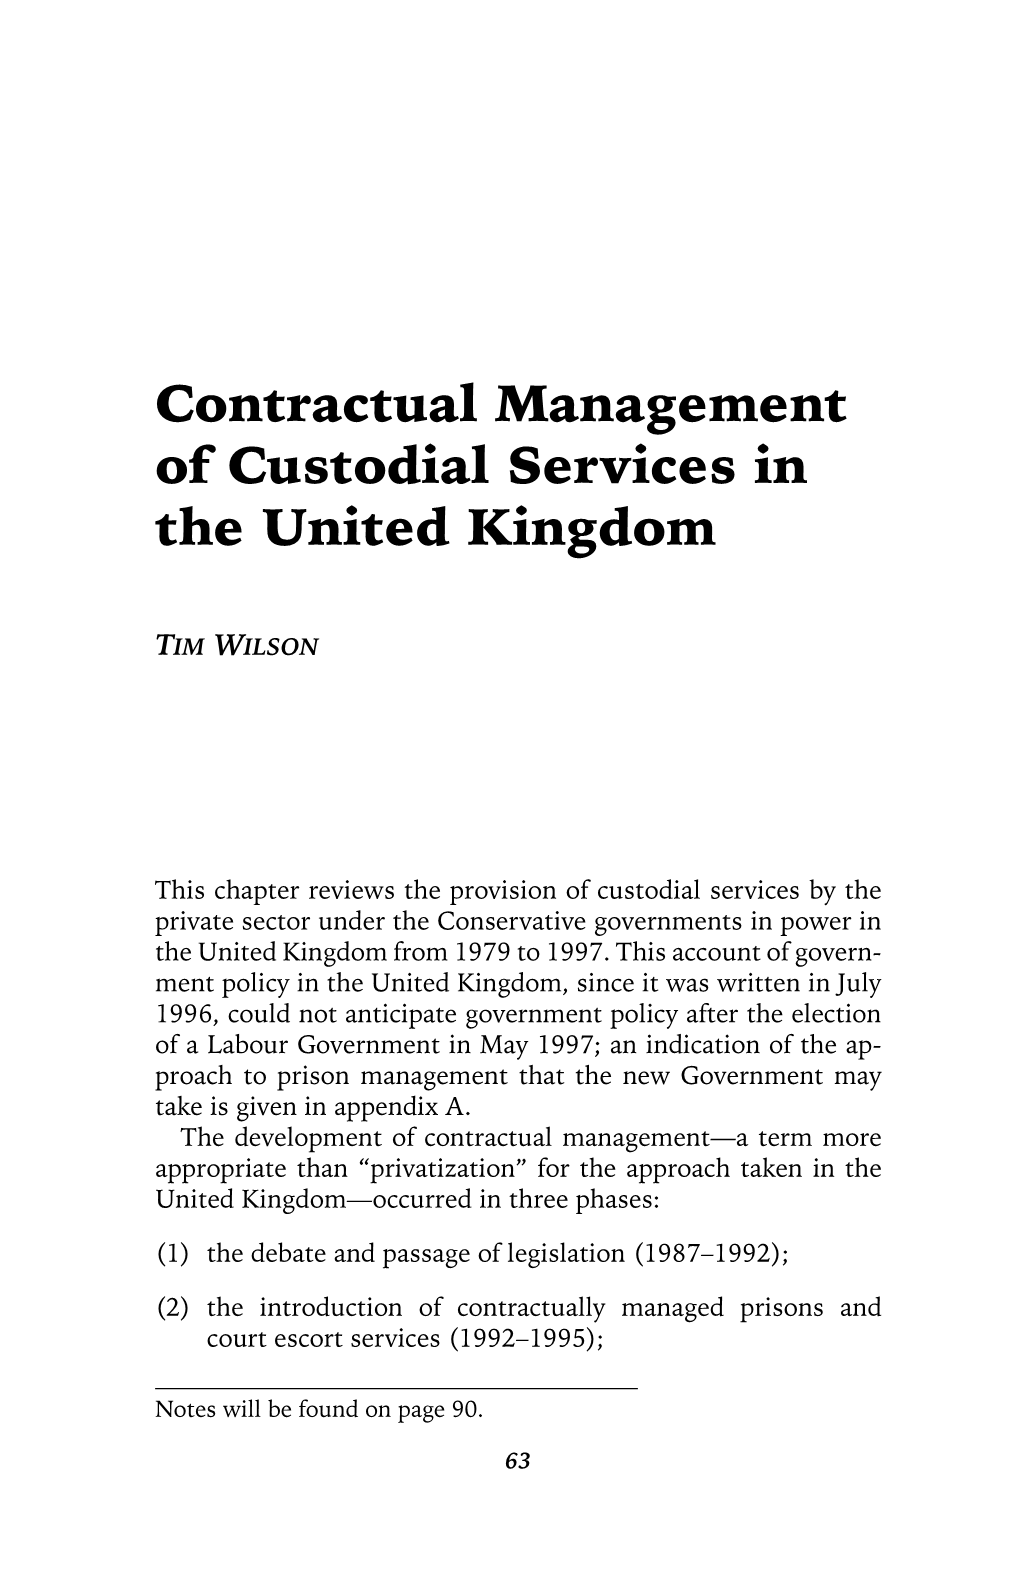 Contractual Management of Custodial Services in the United Kingdom